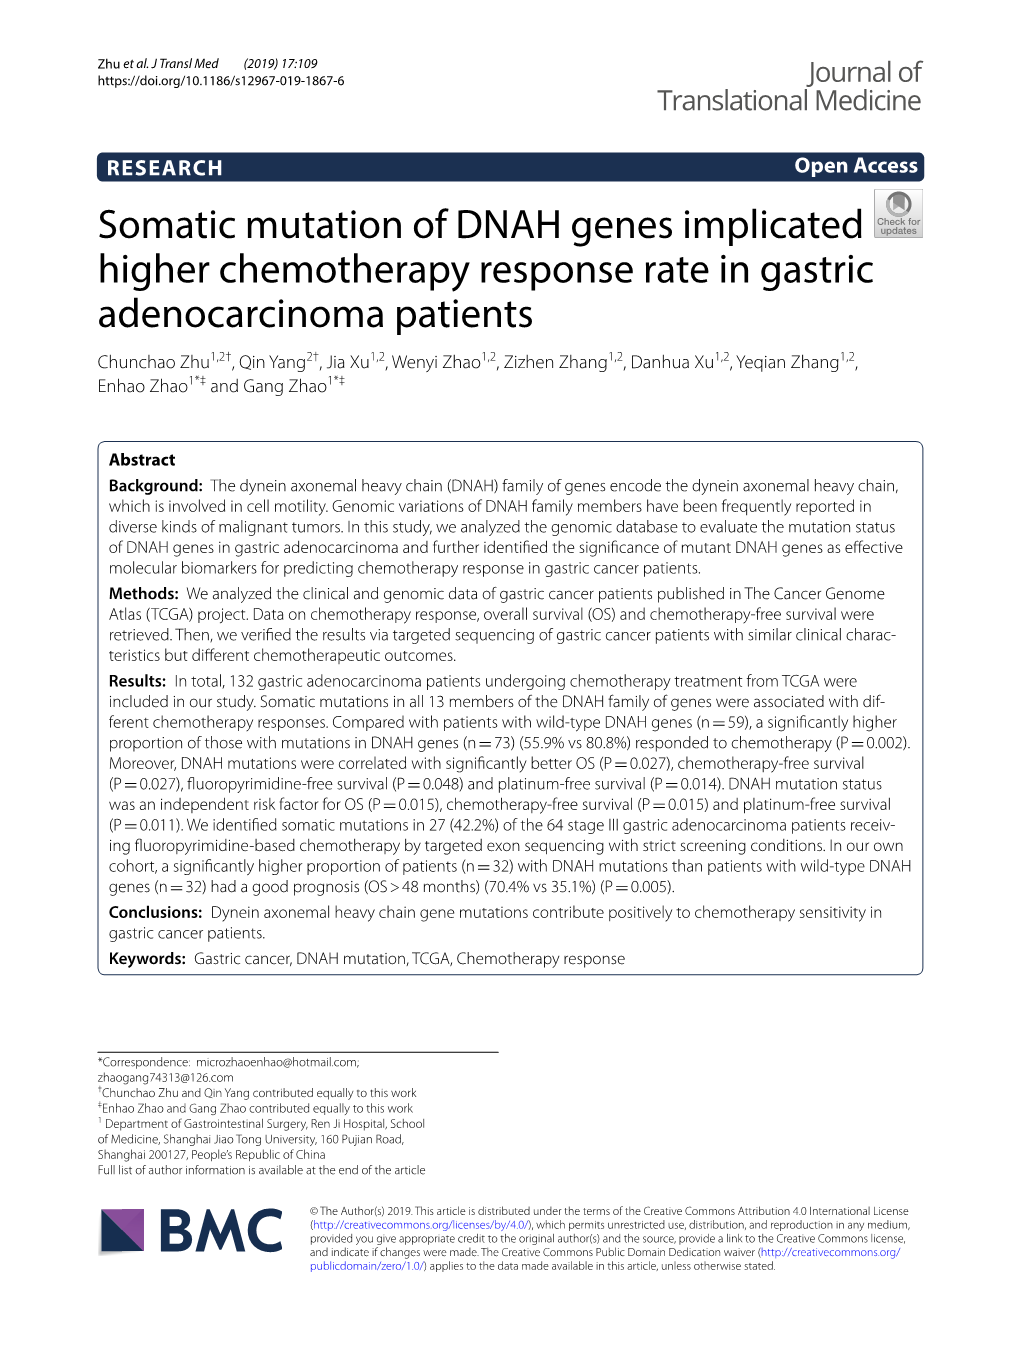 Somatic Mutation of DNAH Genes Implicated Higher Chemotherapy